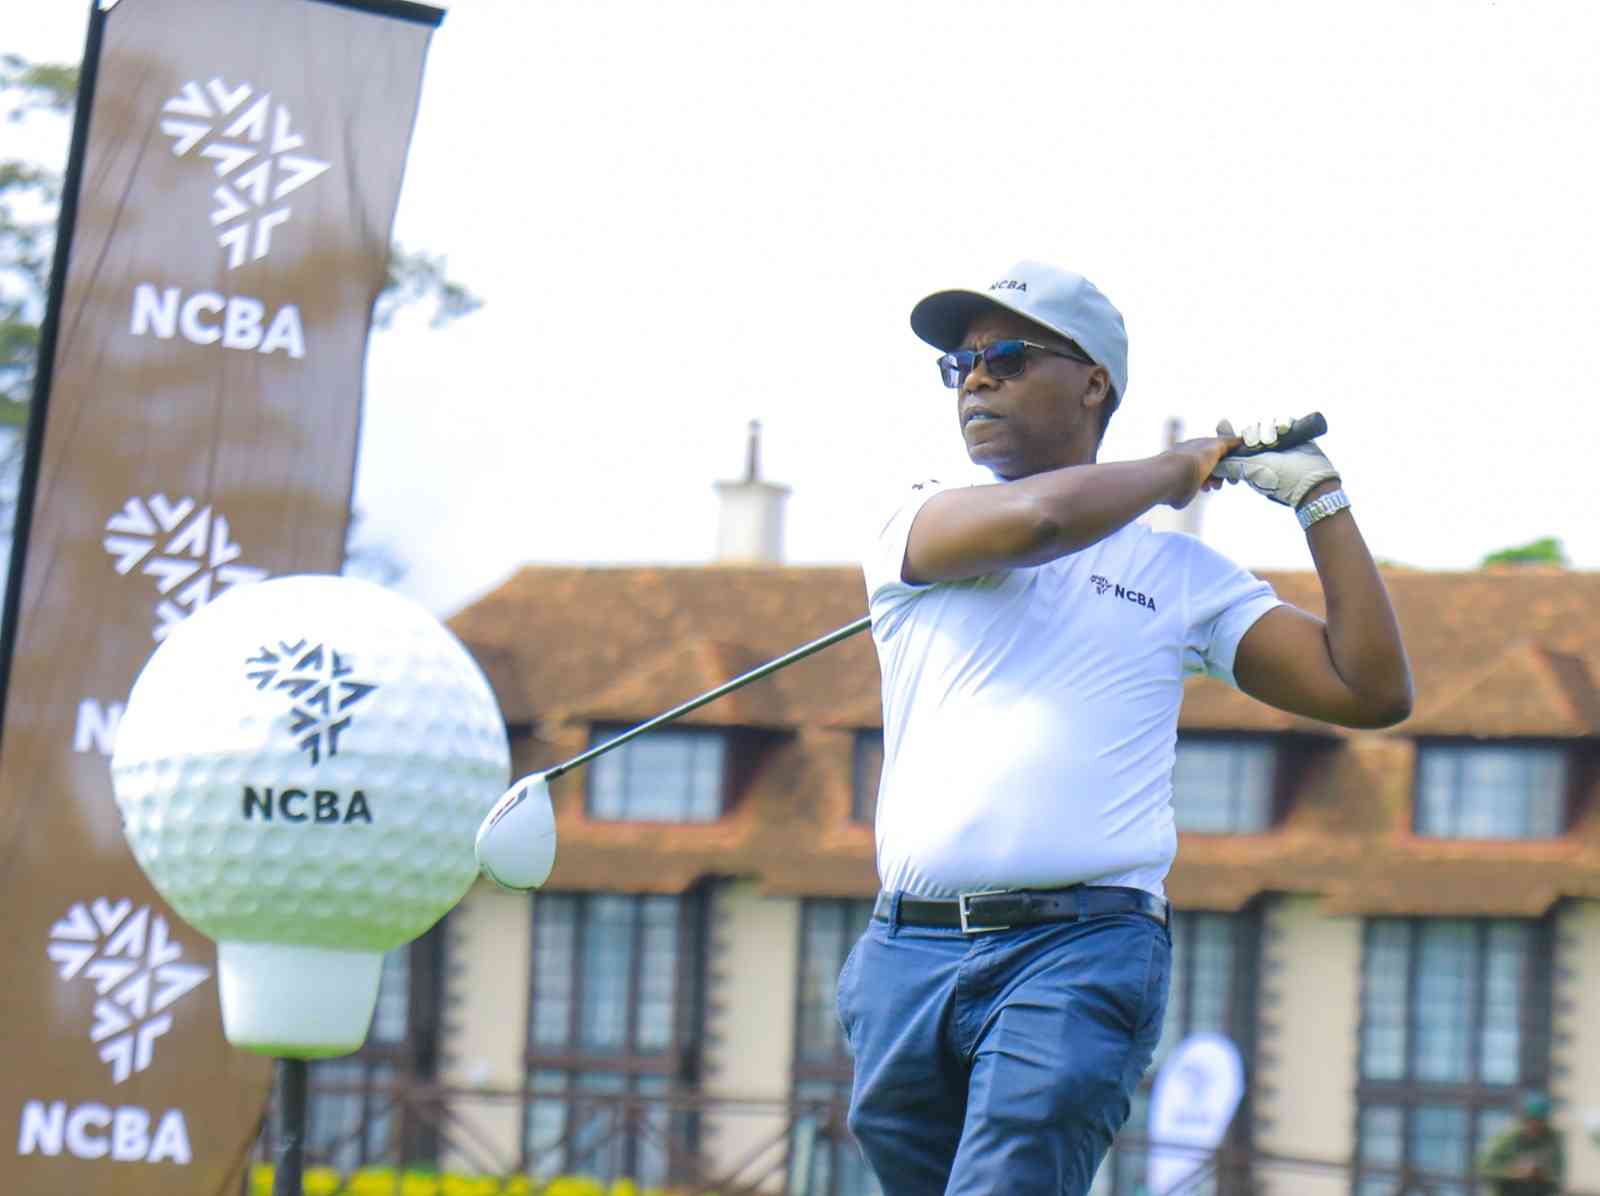 NCBA series and KCB East African tour spice up weekend